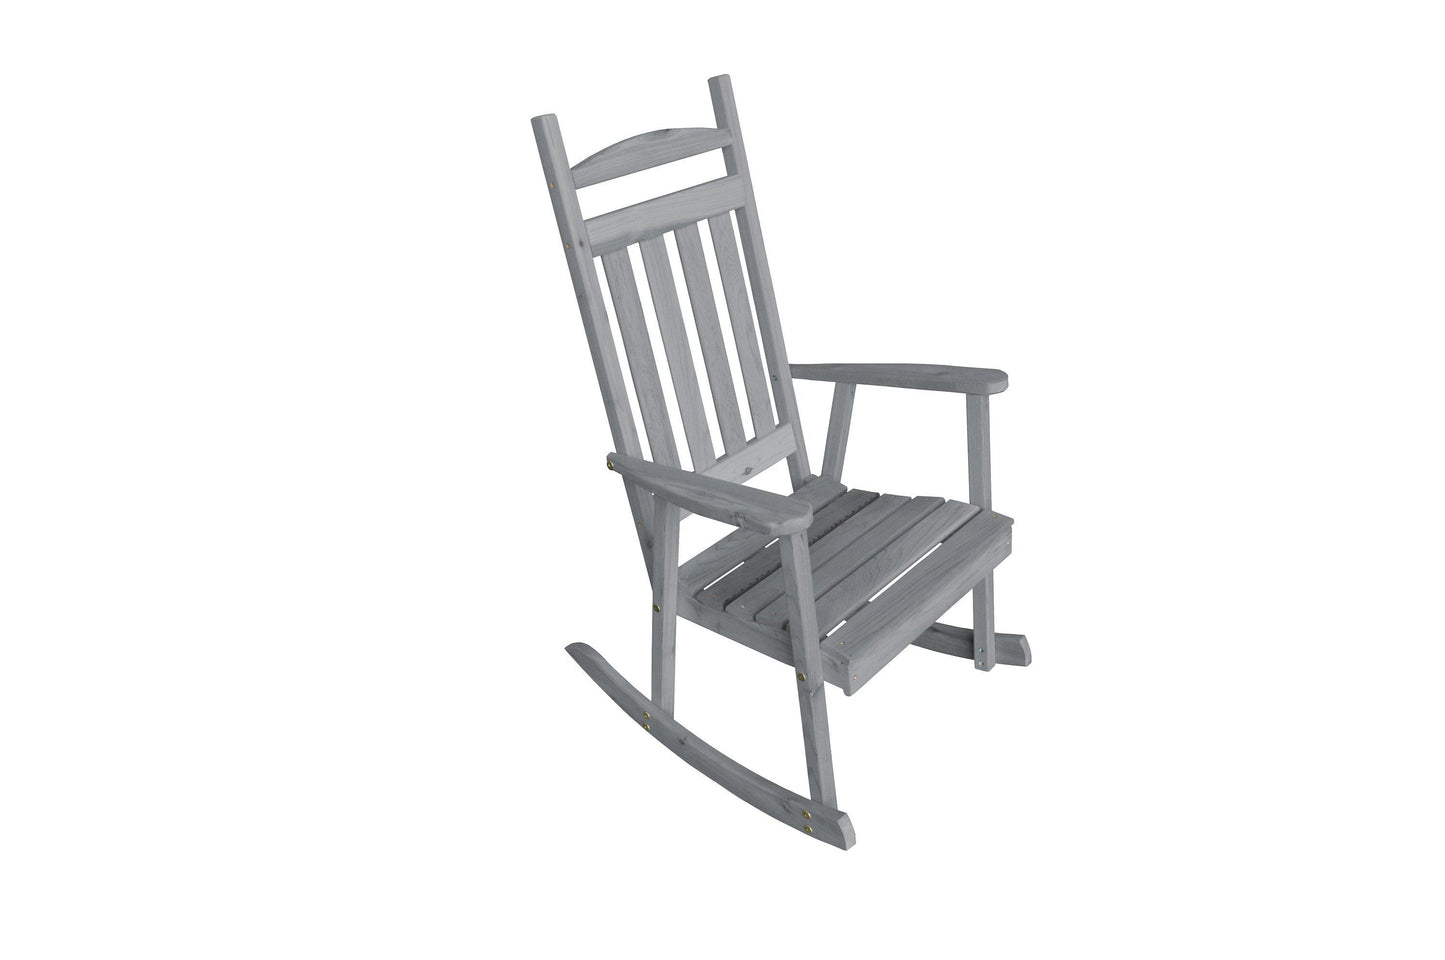 A&L FURNITURE CO. Western Red Cedar Classic Porch Rocking Chair - LEAD TIME TO SHIP 2 WEEKS